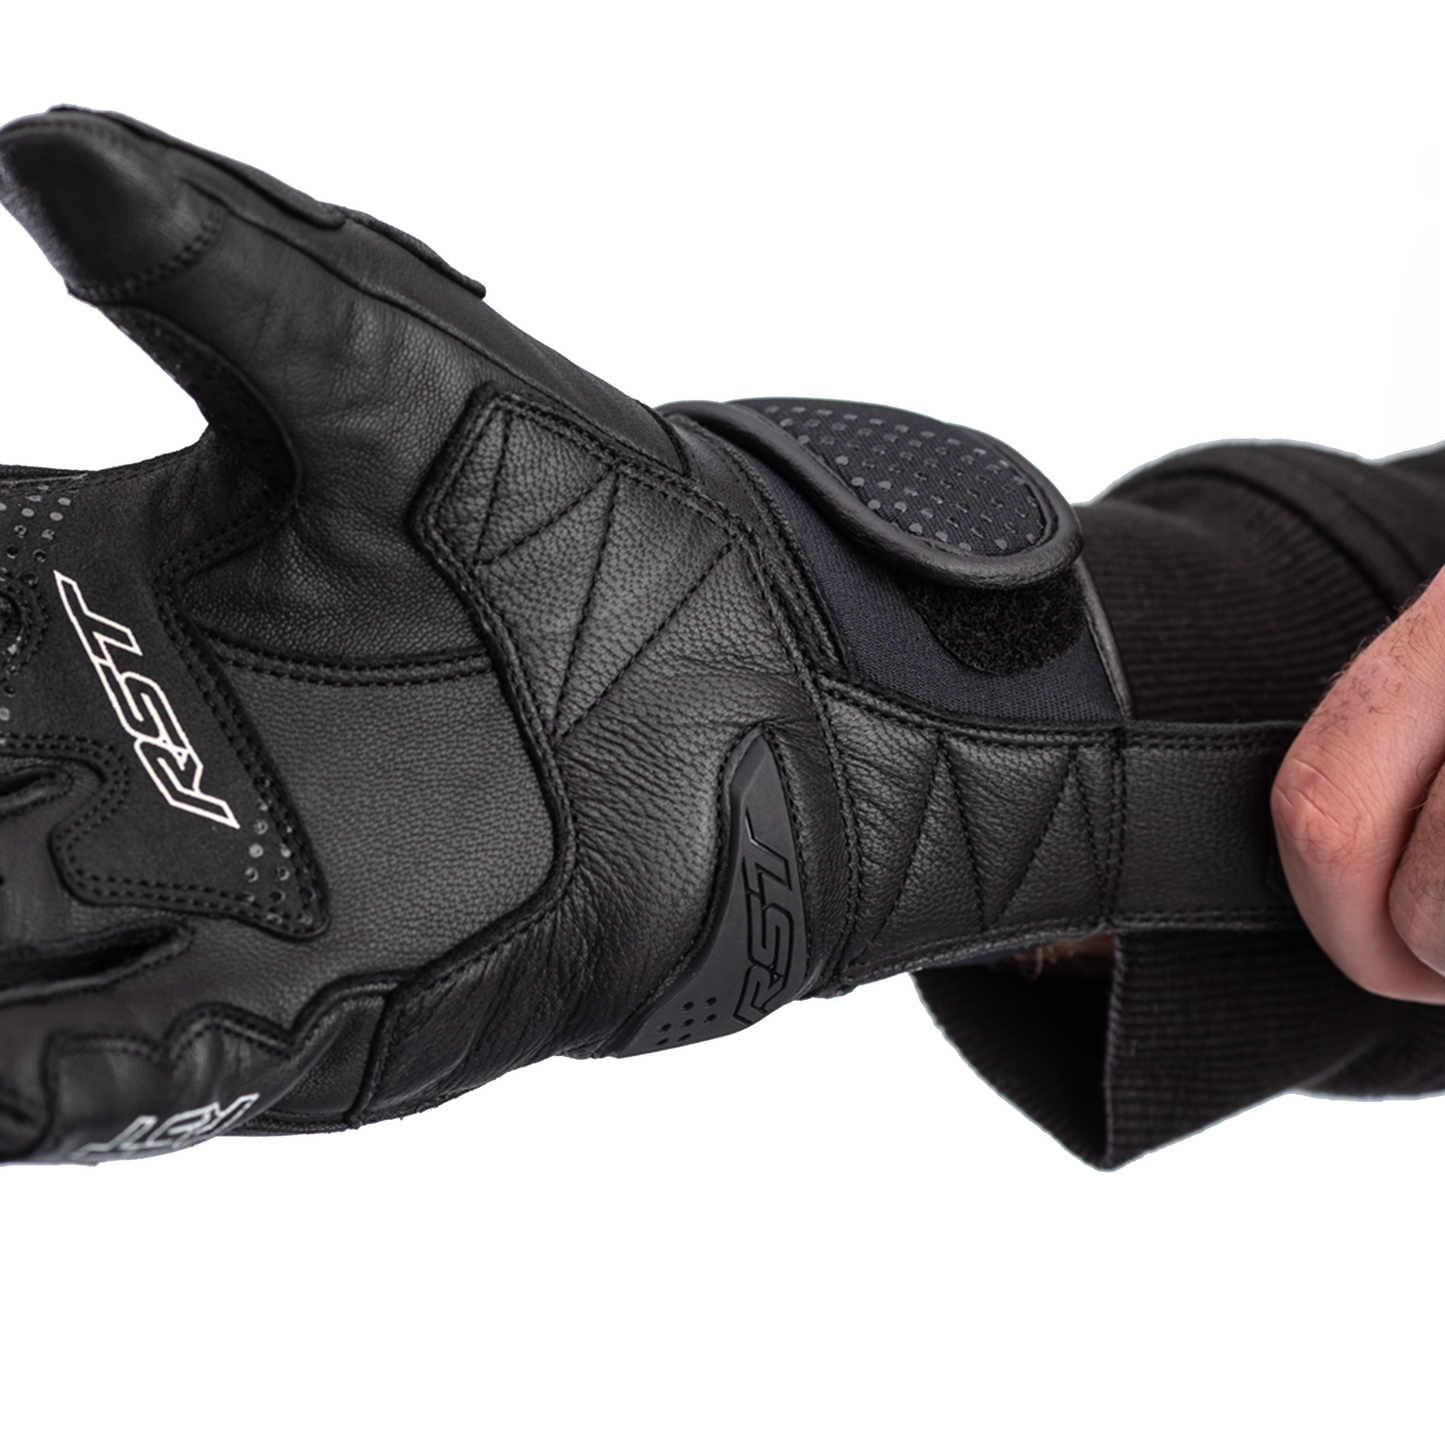 RST Freestyle 2 Leather Riding Gloves - CE APPROVED - Black